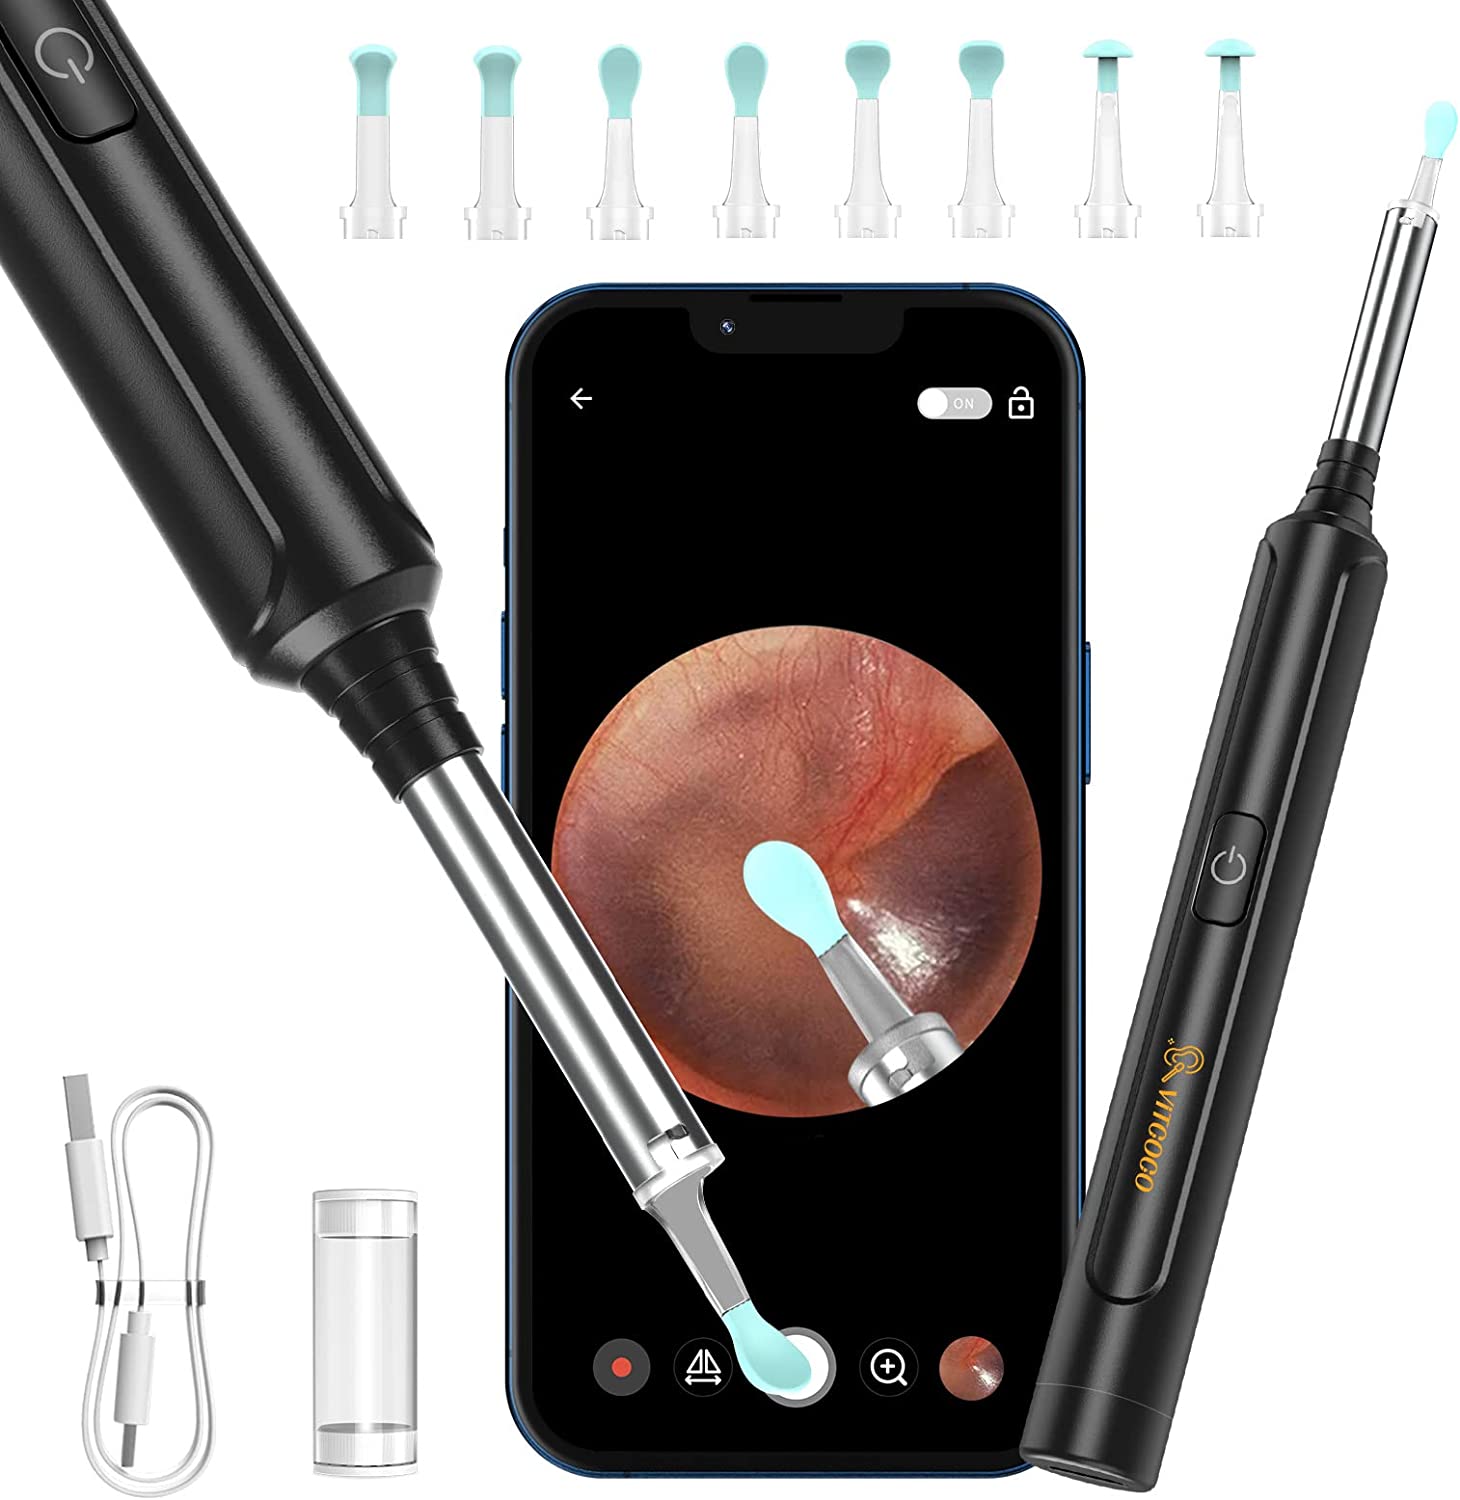 VITCOCO Ear Wax Removal Kit Ear Camera 1296P High-Definition Earwax Cleaner  Portable USB Charging Visible 6 LED Otoscope for Android, iPhone, Ipad